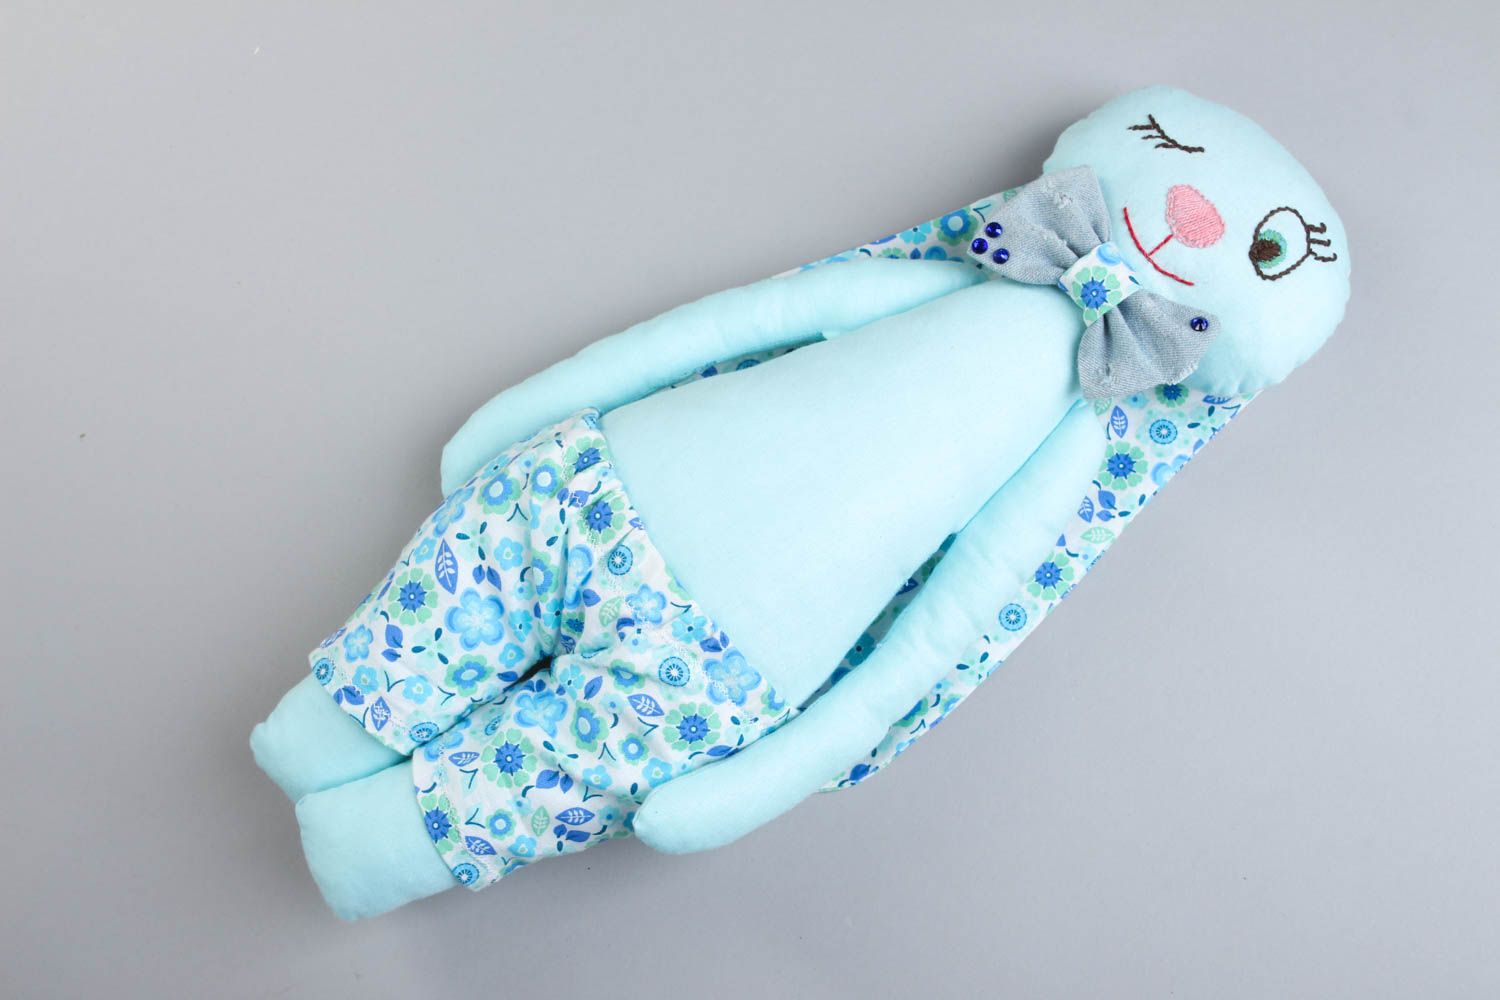 Blue handmade soft toy stuffed toy best toys for kids cute childrens toys photo 1